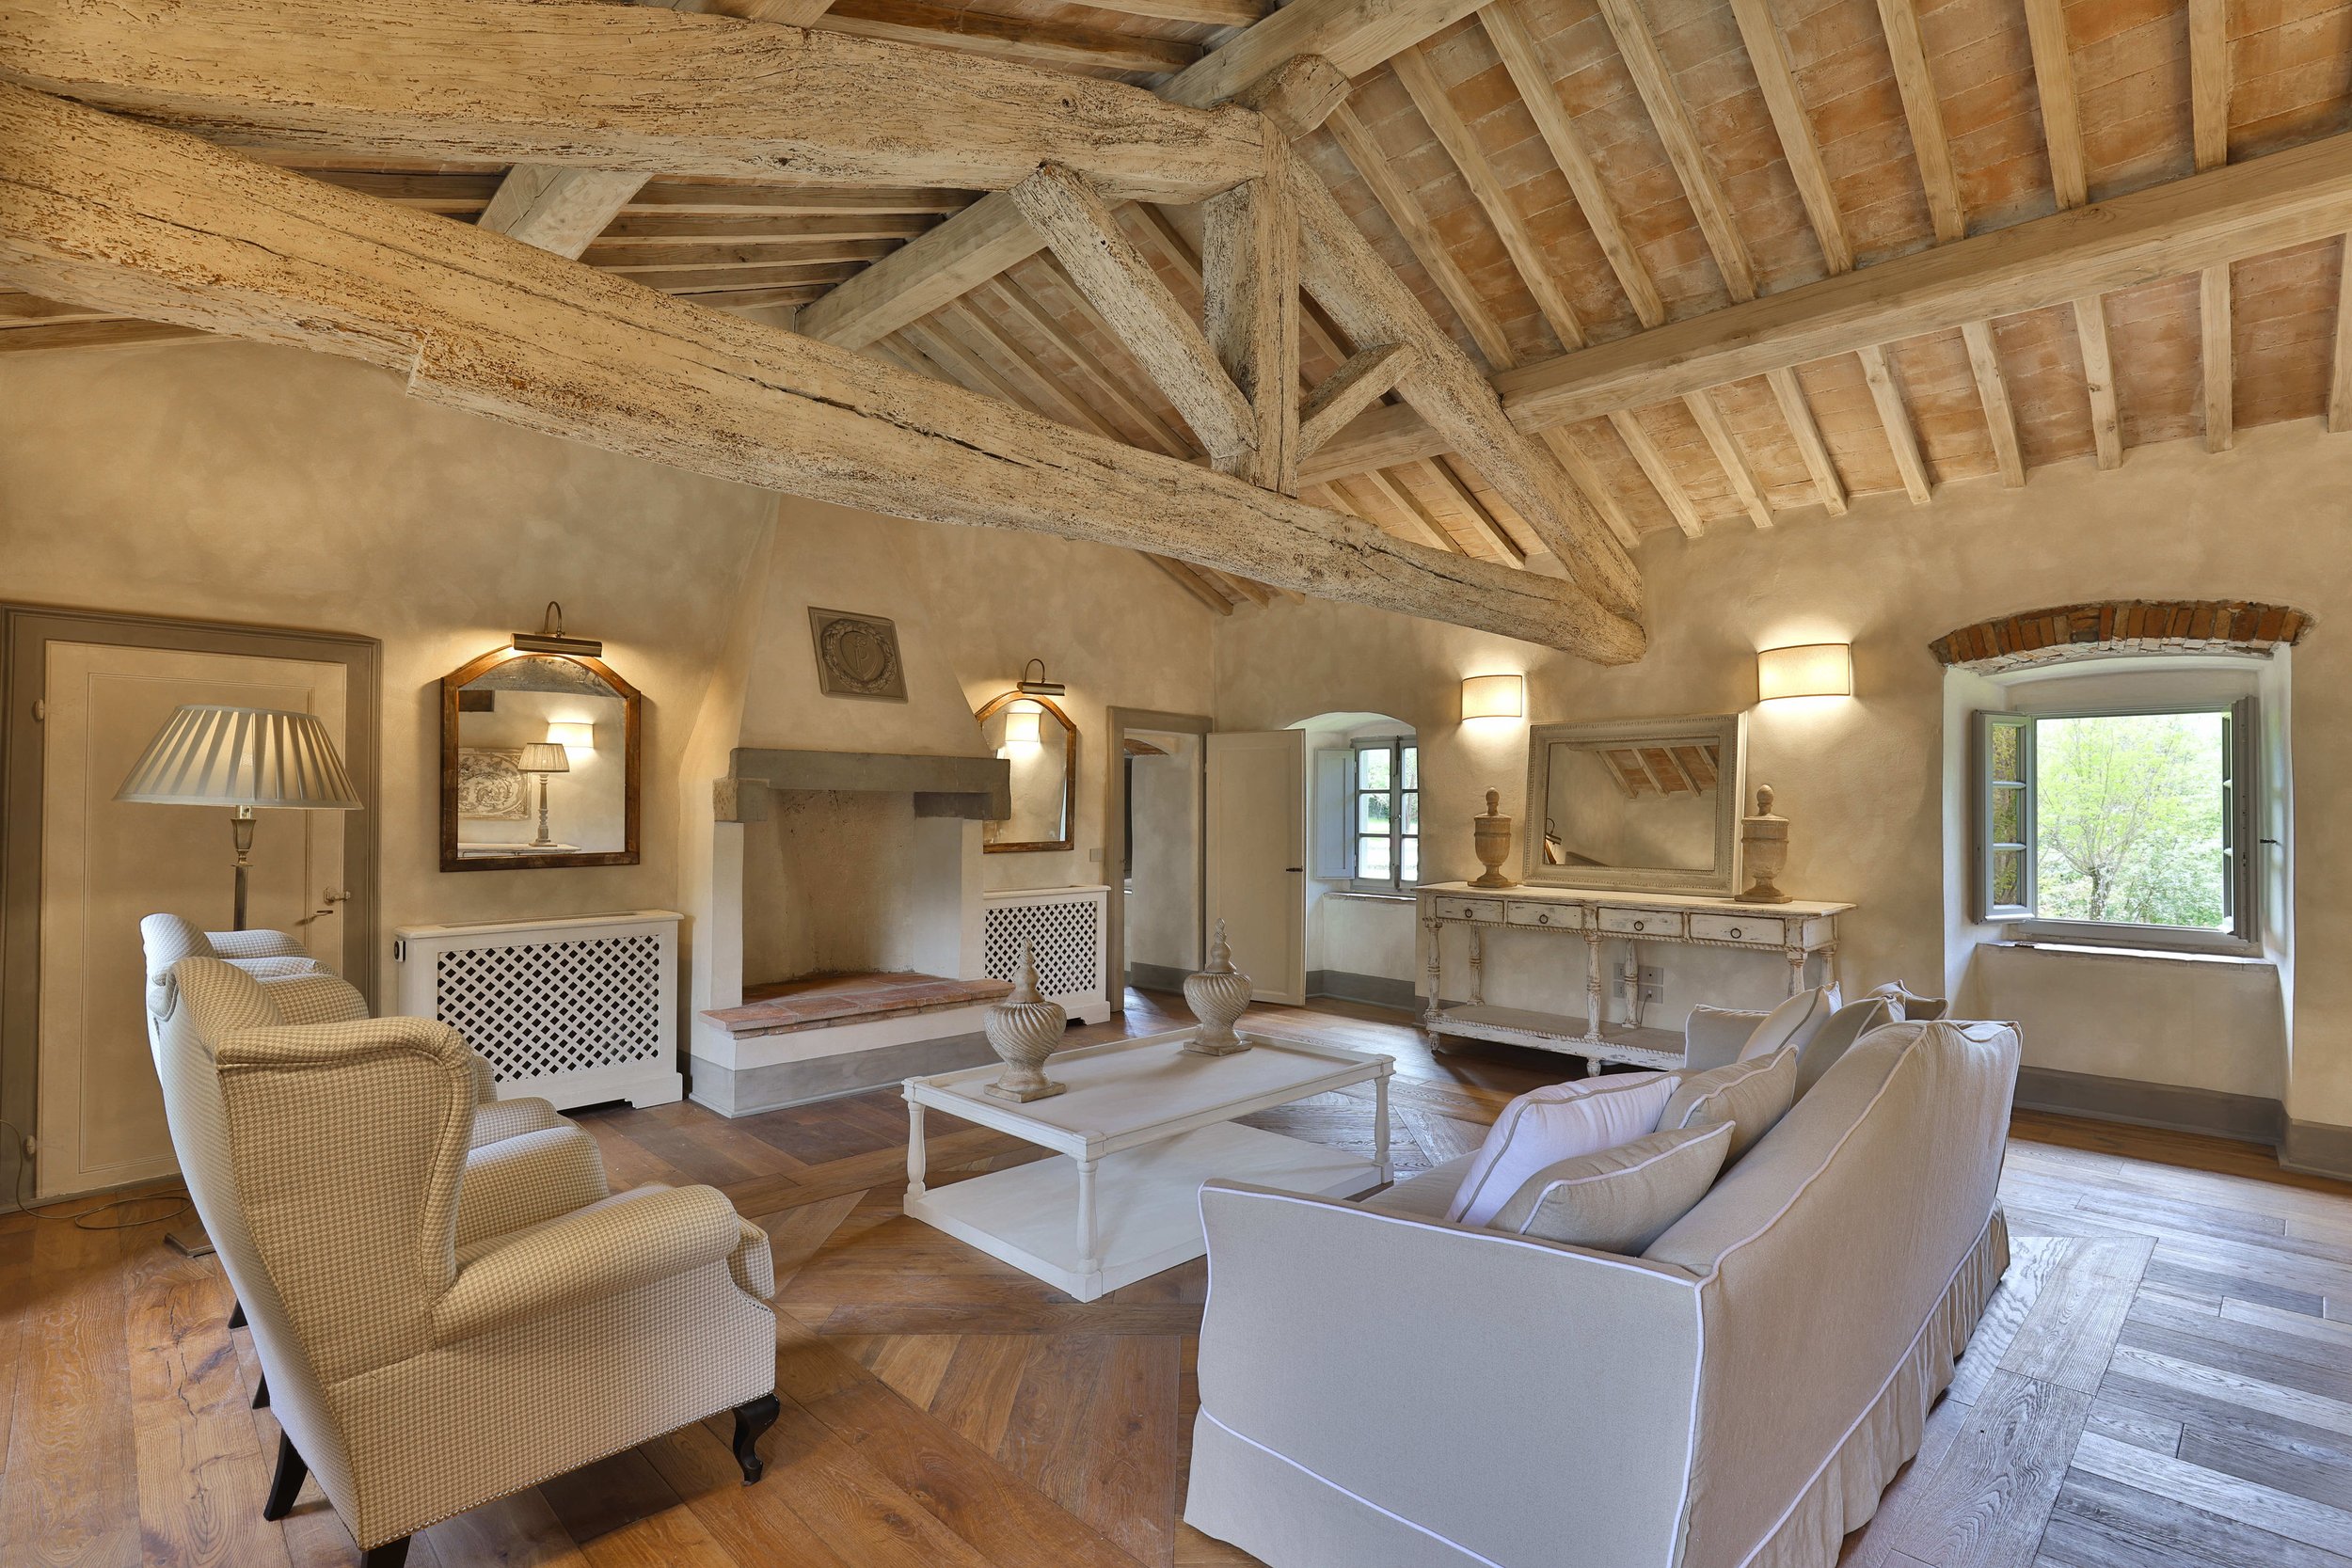 Francis York NEW Luxury Holiday Rental in the Chianti Hills, Tuscany Booking This Summer  4.jpg